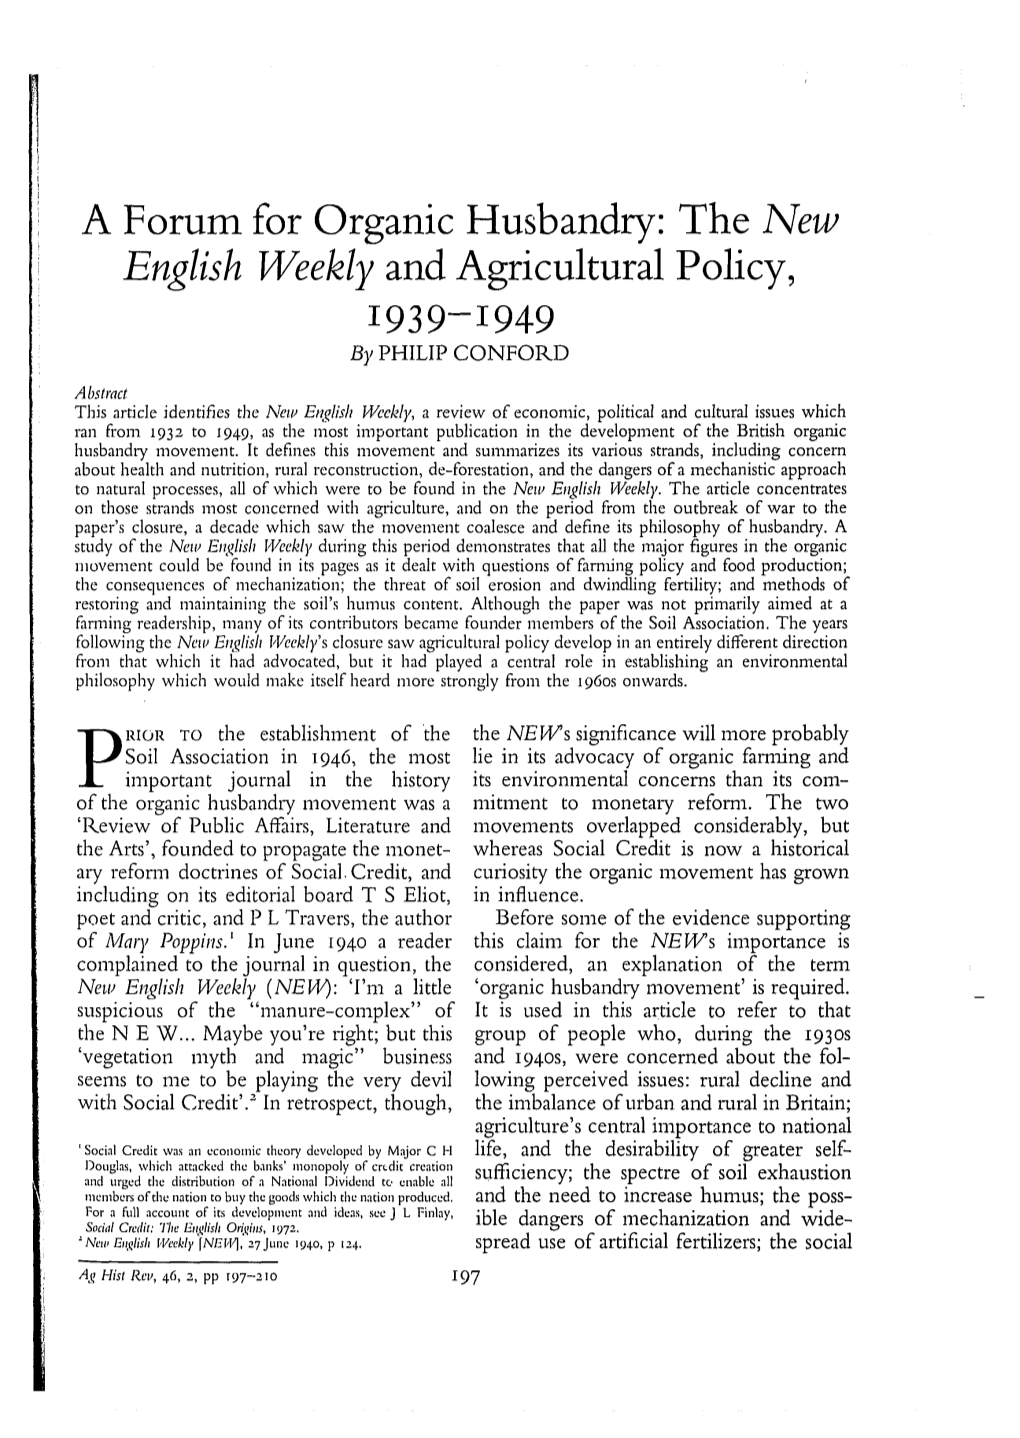 A Forum for Organic Husbandry: the New English Weekly and Agricultural Policy, 1939-1949 /3}, PHILIP CONFORD